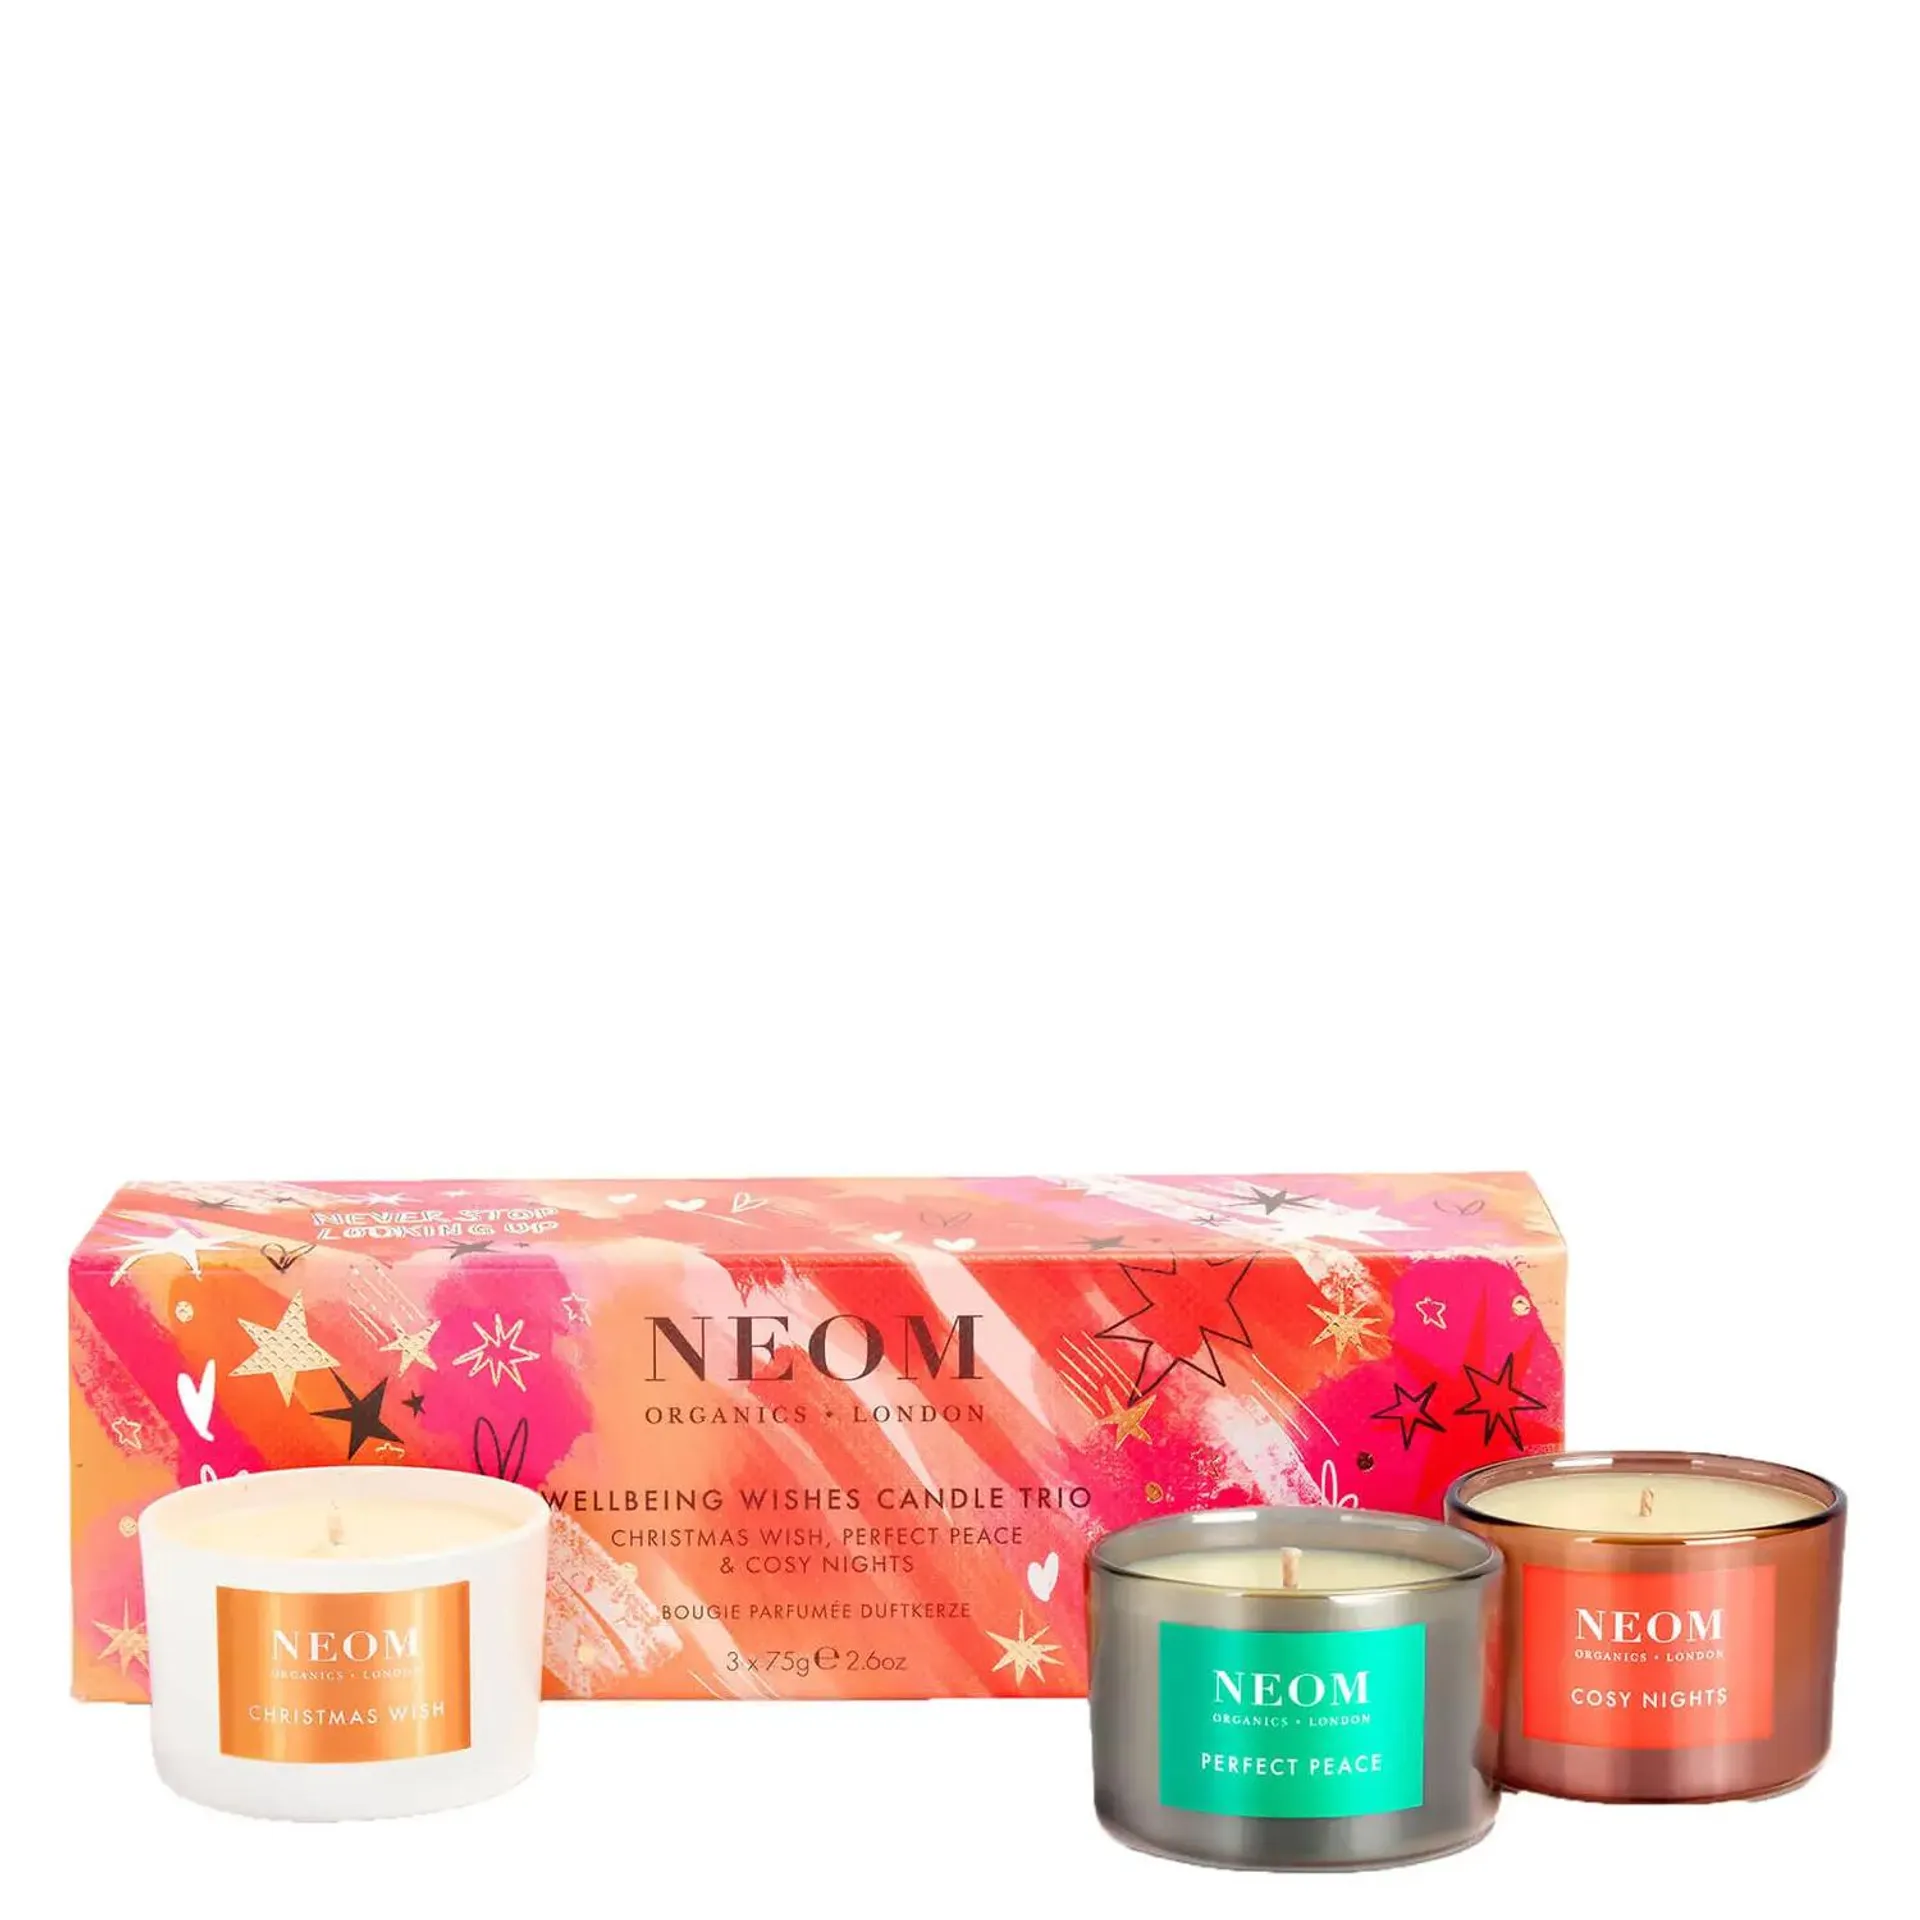 Neom Organics London Scent To Make You Feel Good Wellbeing Wishes Candle Trio Gift Set